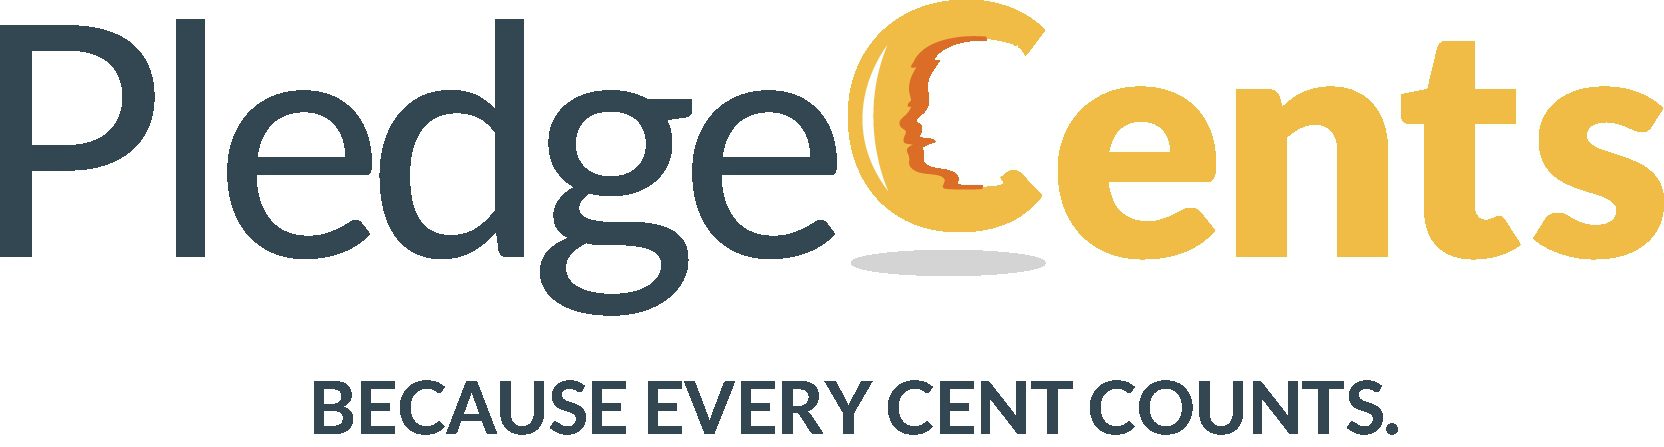 PledgeCents - Fundraising Platform for all your classroom needs